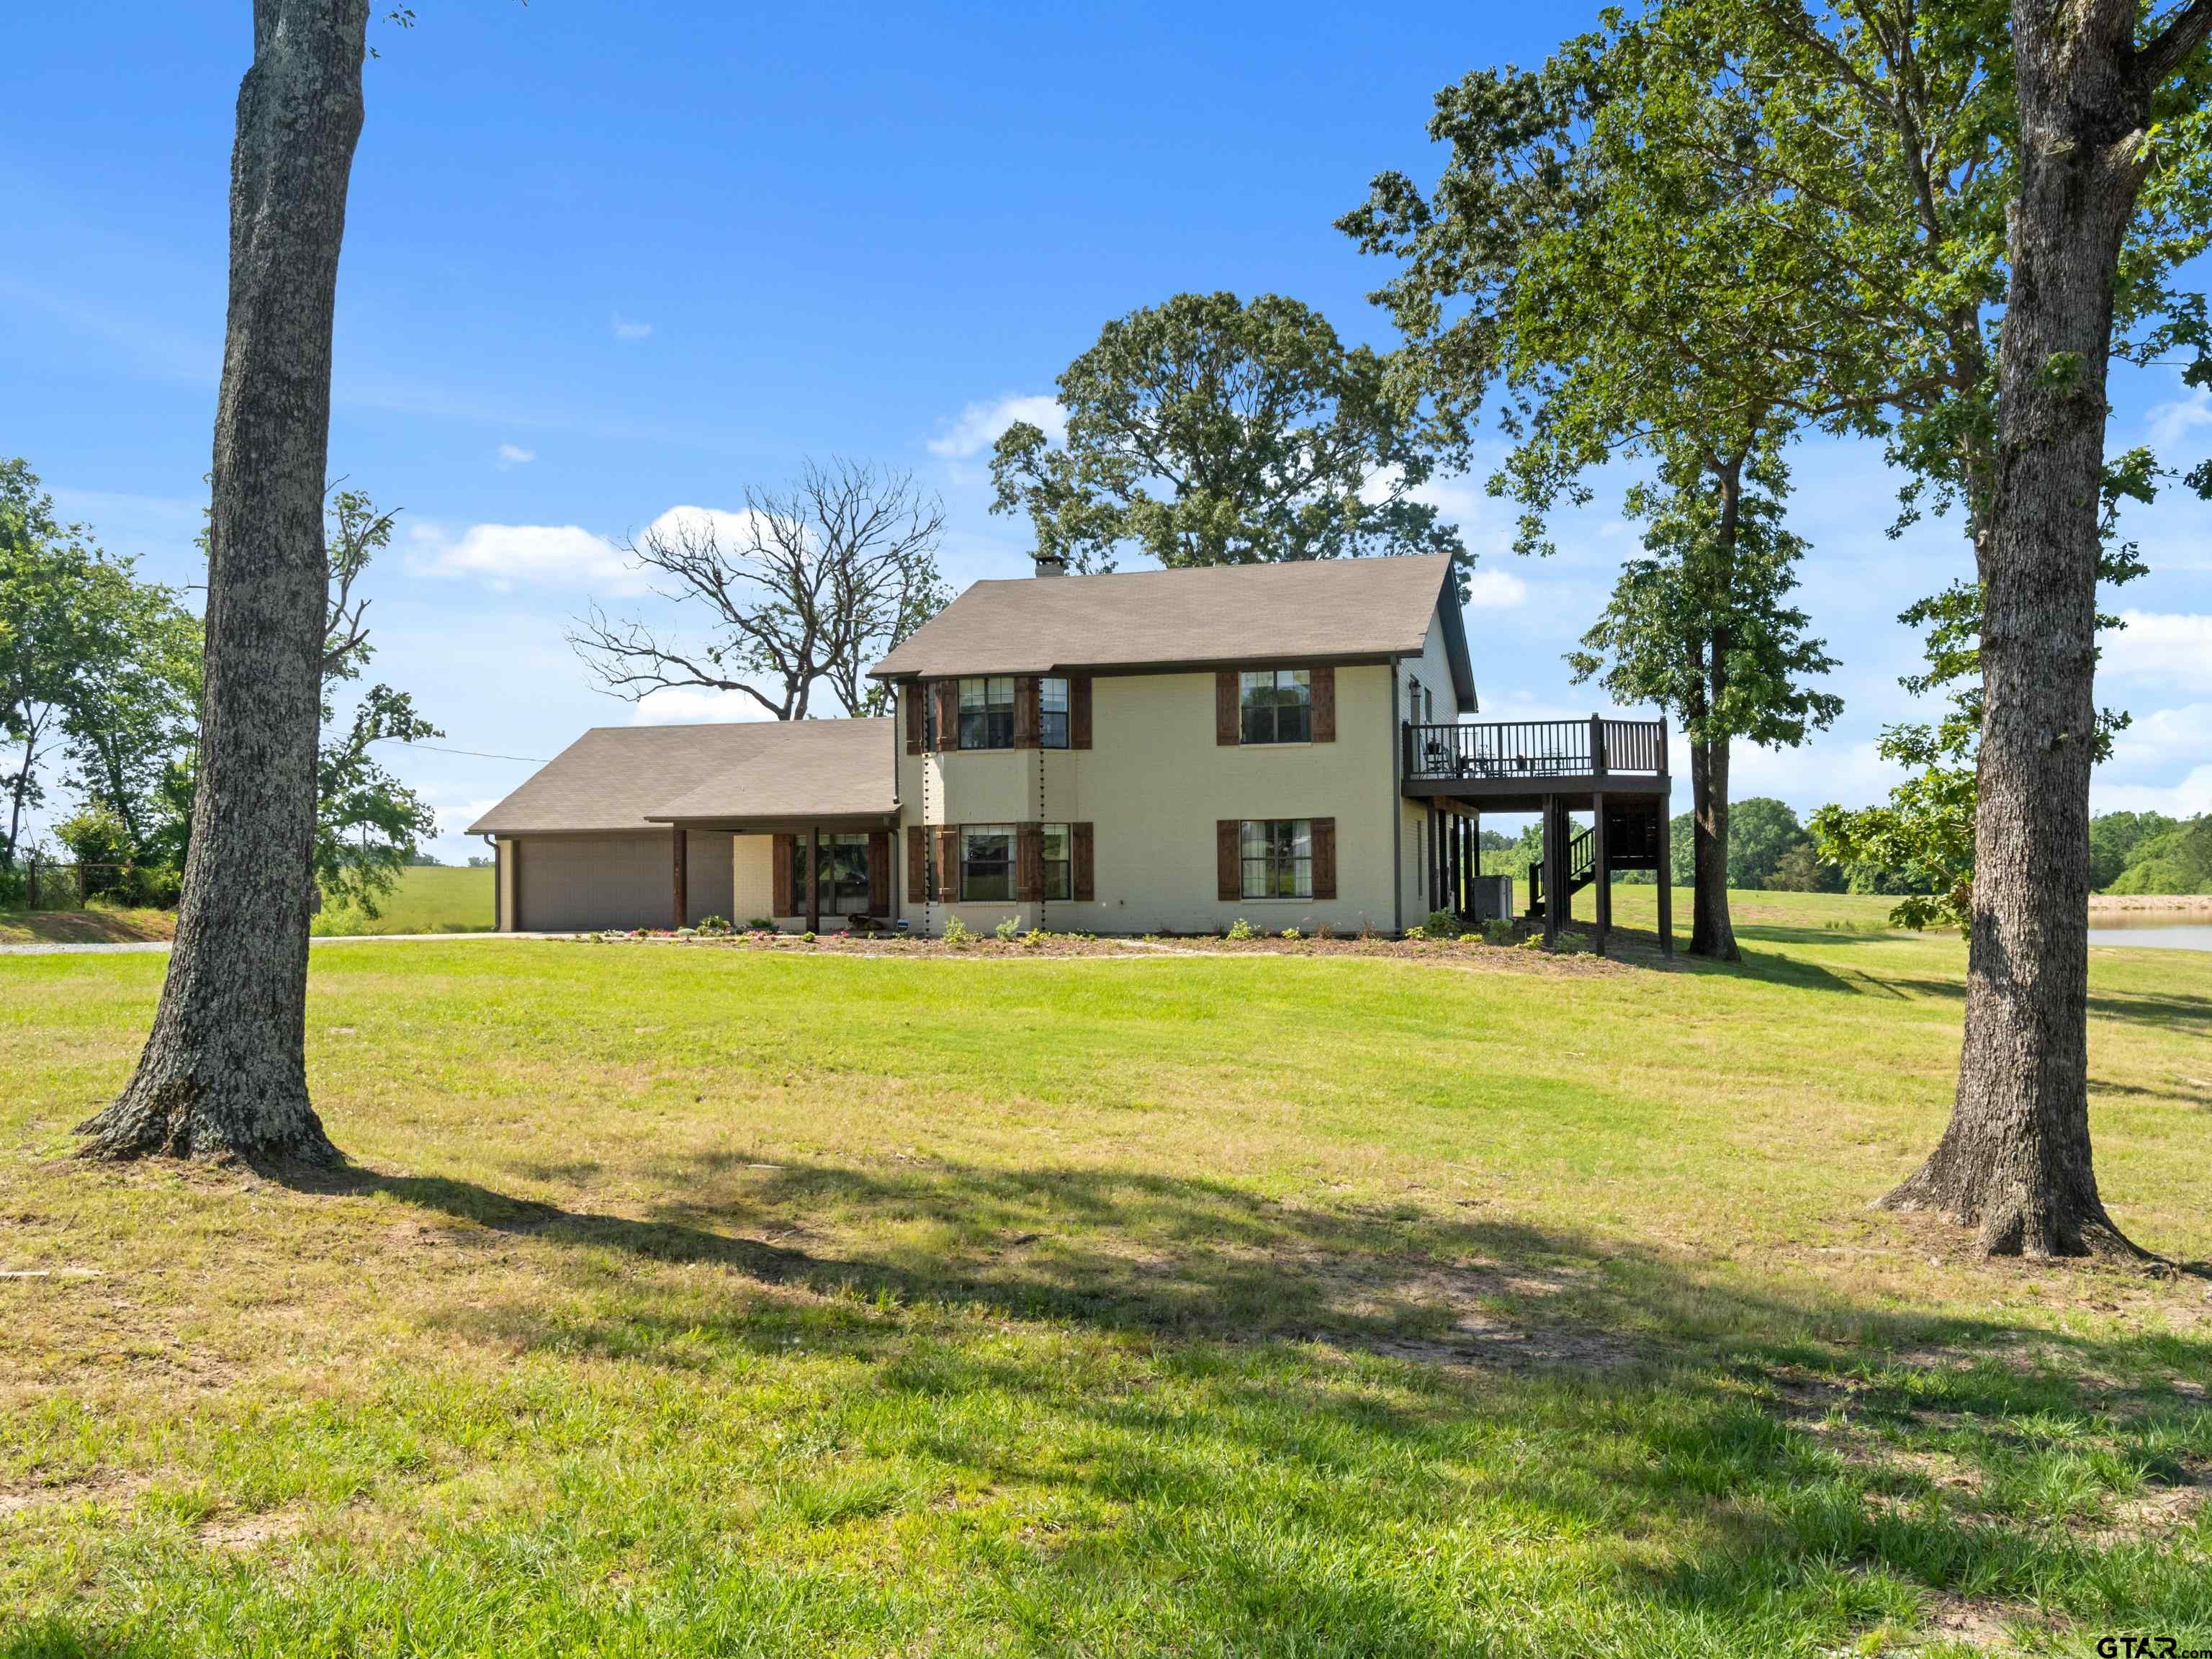 This Upshur County beauty pulls out all of the stops. Almost 5000 sq ft including decks overlooking almost 40 acres with 2ponds covering 7 acres! Sit on the deck and enjoy the breeze, drop a line into the stocked ponds, work the cattle in the pipefence pens or start a project in the 6000+/- sq ft shop that is fully insulated with living quarters and 2 project rooms. Thepossibilities are endless and that's just the outside! Inside the home, you will find all updated floors, countertops, appliances,bathrooms and refreshed paint! This 5 bedroom, 3 bath house provides plenty of space to spread out and storage galore! Ifyou need an office space, it's here! And it overlooks the back ponds. Don't want to share your closet? No problem! This mastersuite has 2 big, separate walk-in closets. But can we talk about the master bath? Relax in your soaker tub while you overlookyour land. Enjoy the view while your trouble melt away. OR find yourself invigorated after a shower in this multiheaded tiledshower. Watch the sunrise or the sunset on the deck off of the master bedroom. Work or play, this ranch has it all.